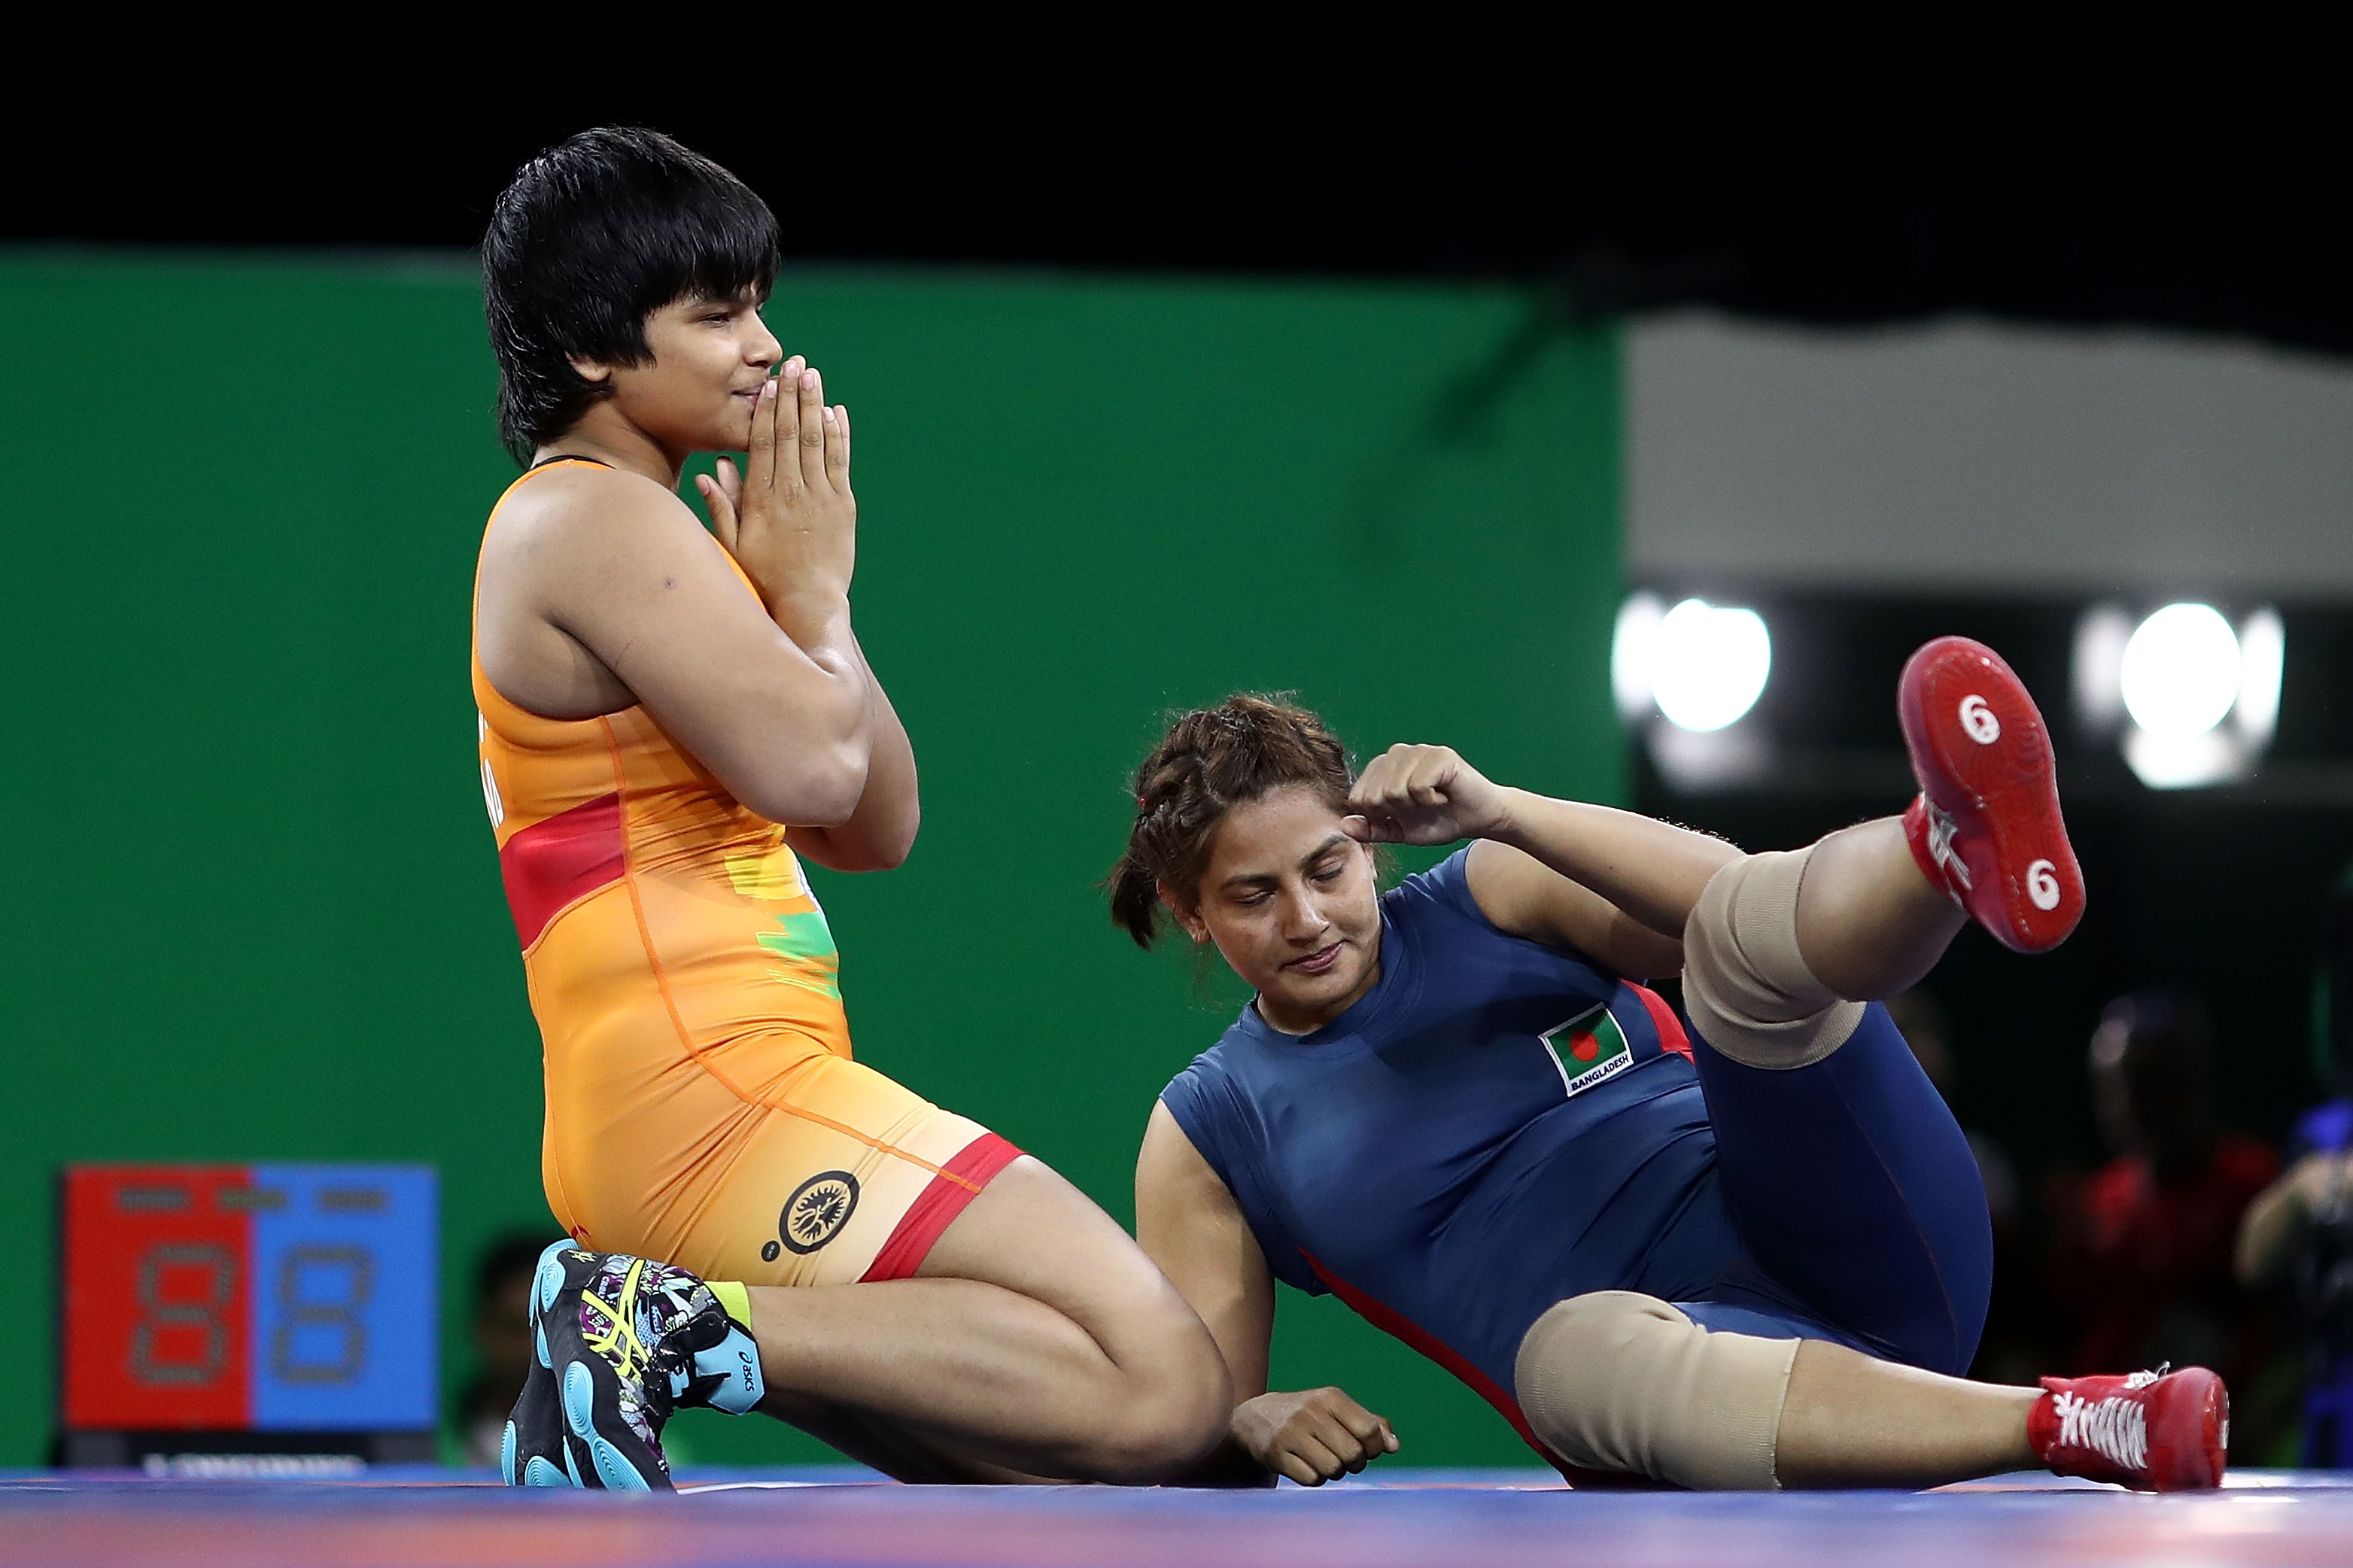 CWG 2018 | 19-year old Divya Kakran bags Bronze Medal in the Women's Freestyle 68 kg